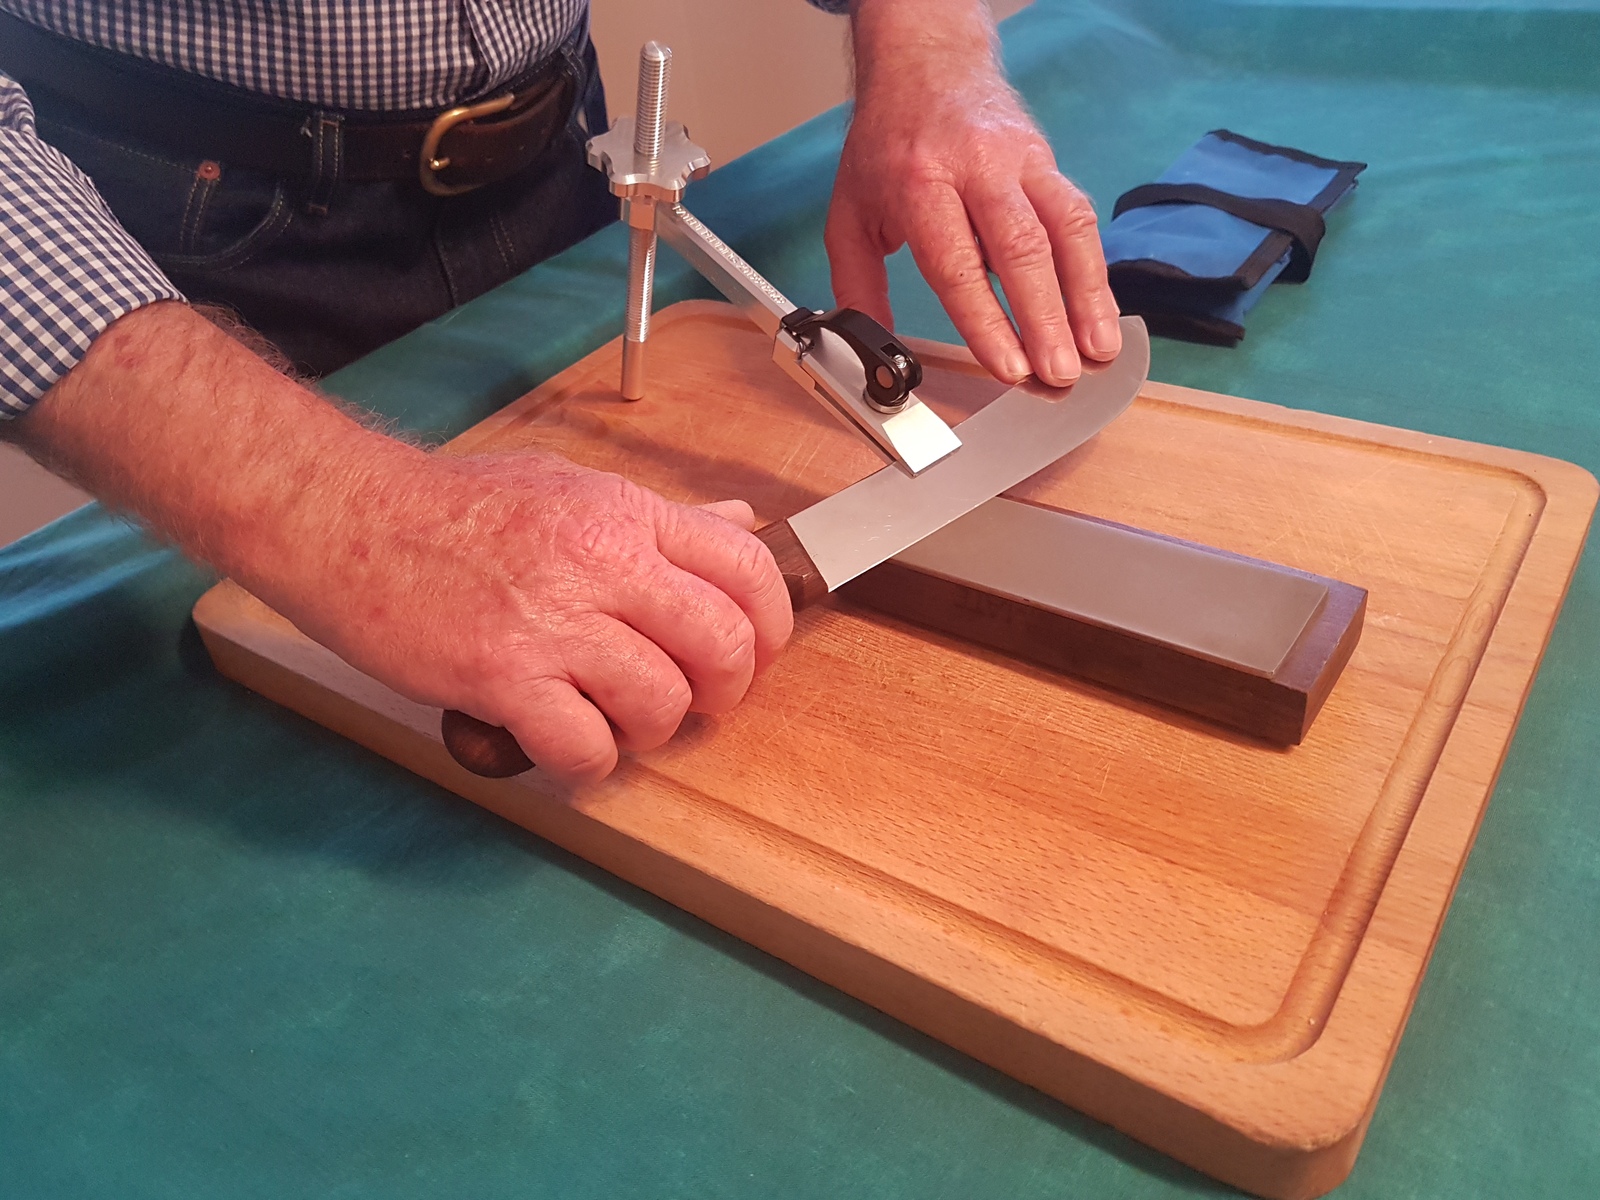 Knifemate Guided Knife Sharpening System